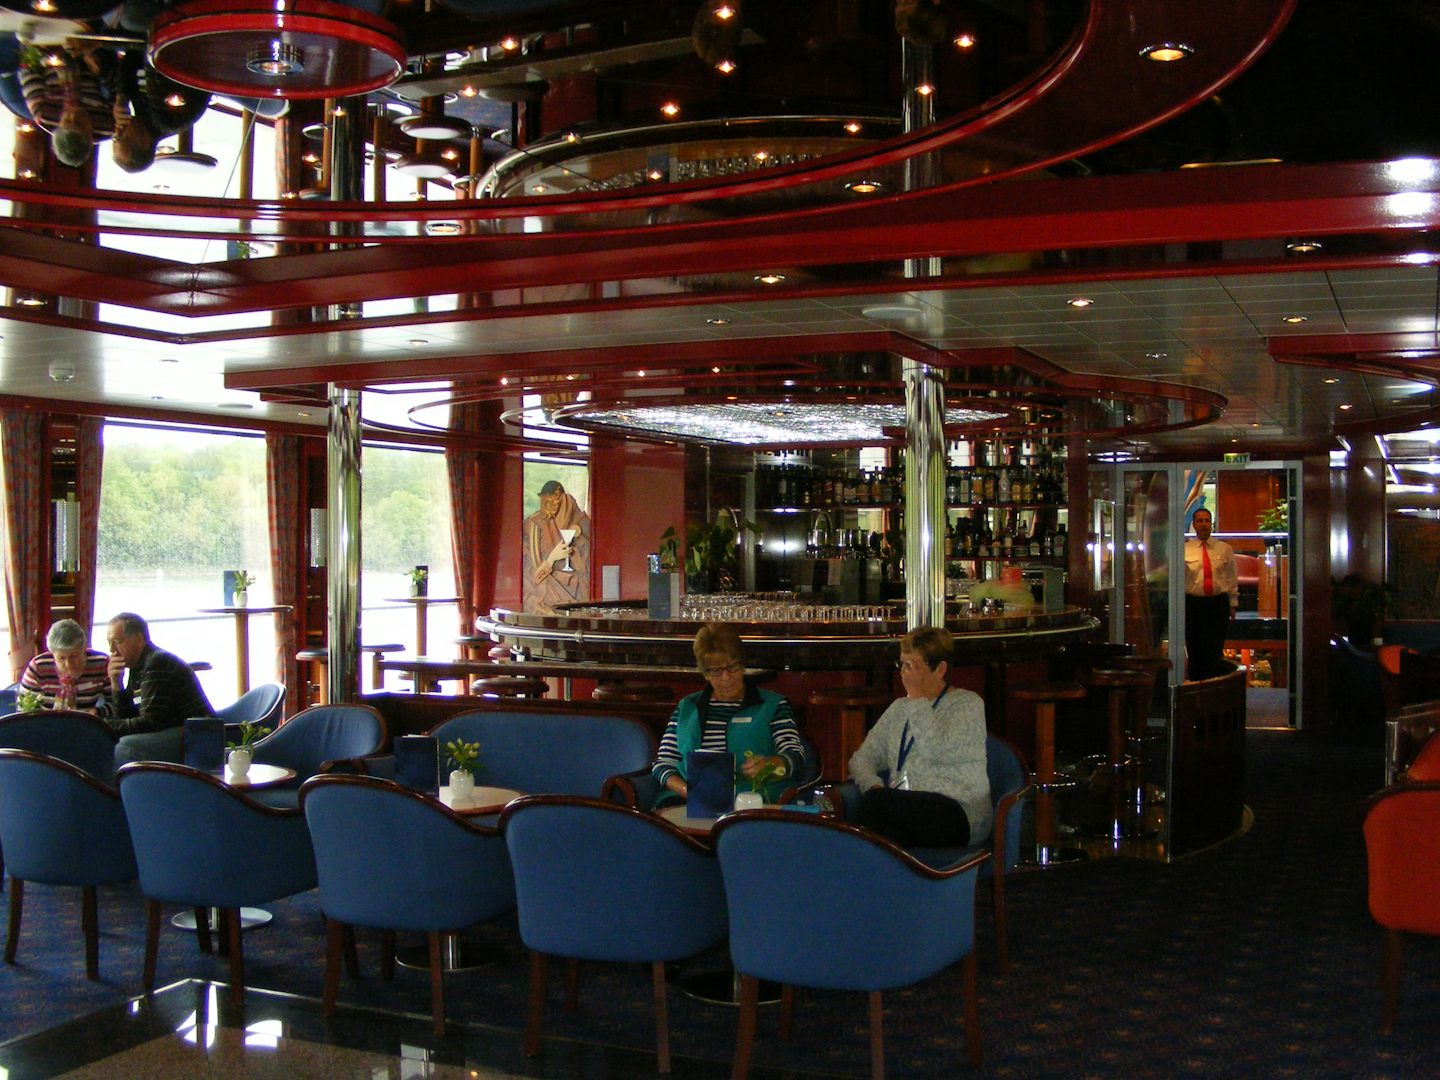 Lounge and bar in background